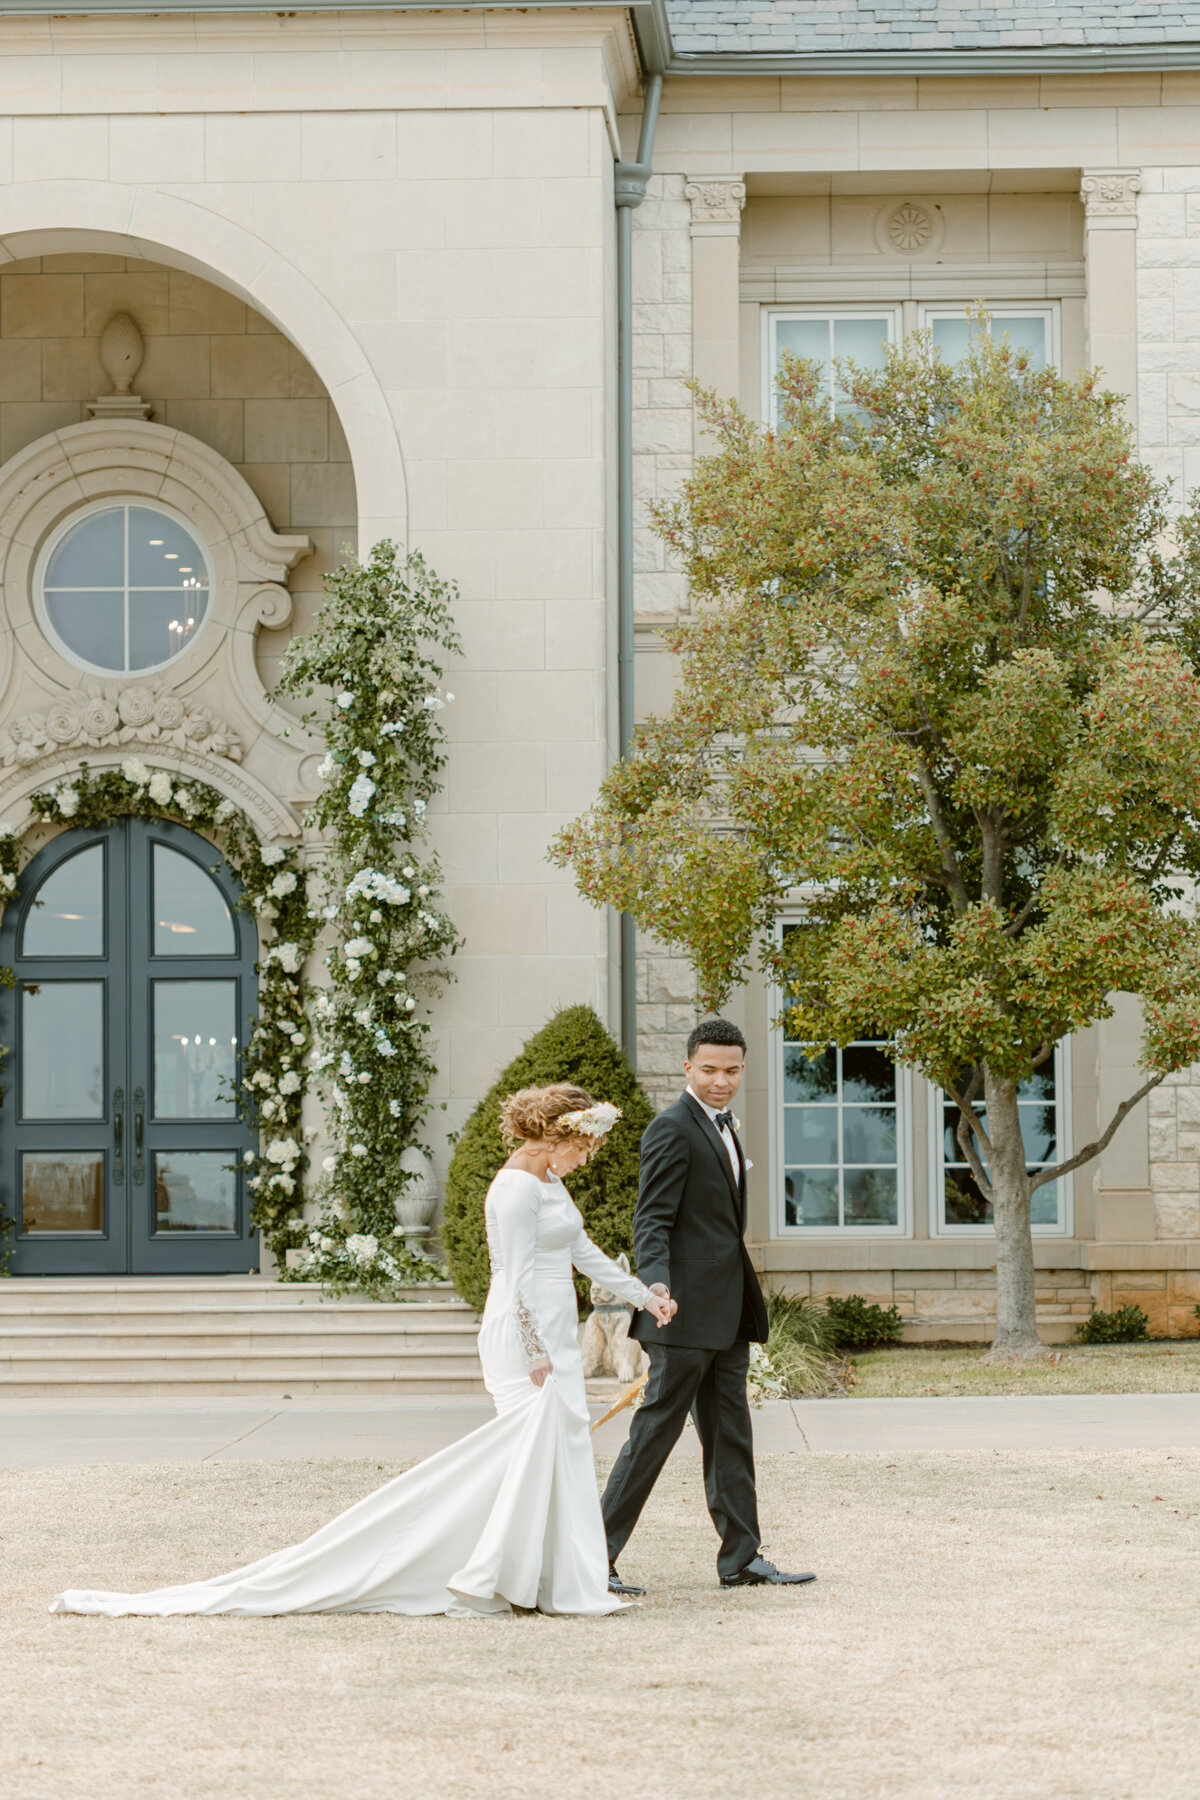 Bride and groom hold hands and walk outside their wedding venue covered in flowers